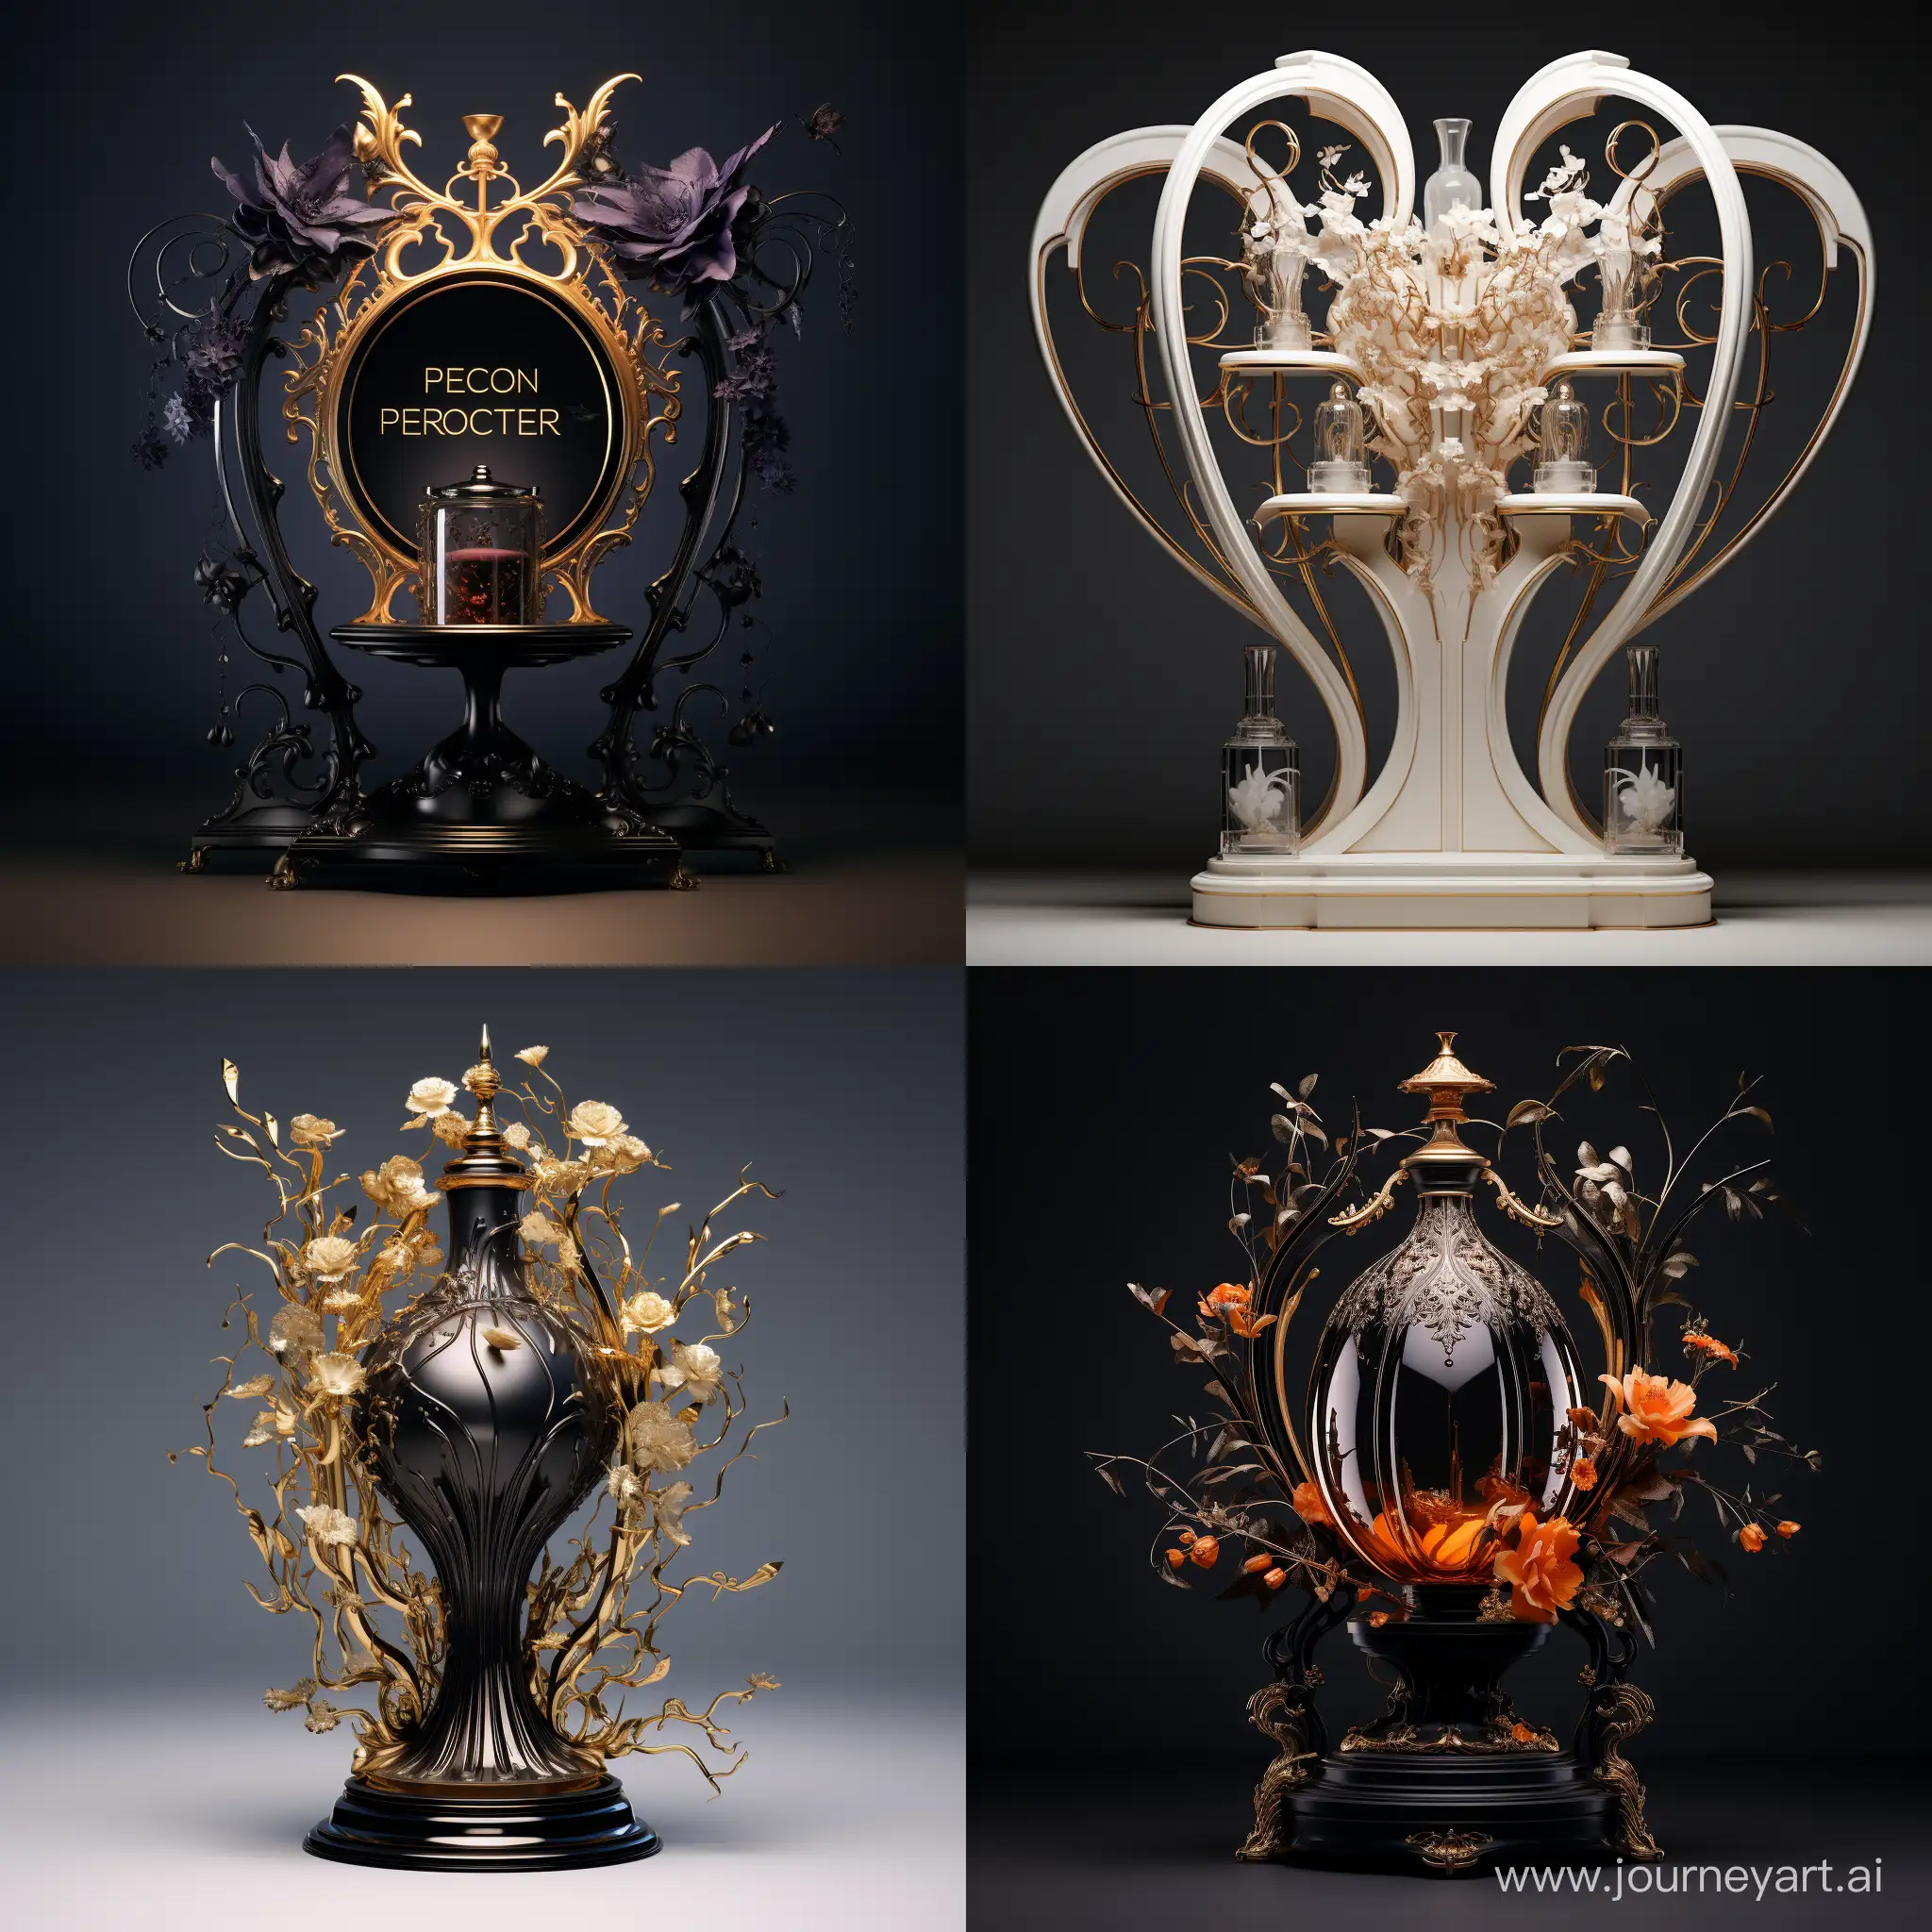 Elegant-Perfume-Pedestal-with-Mocap-Technology-in-11-Scale